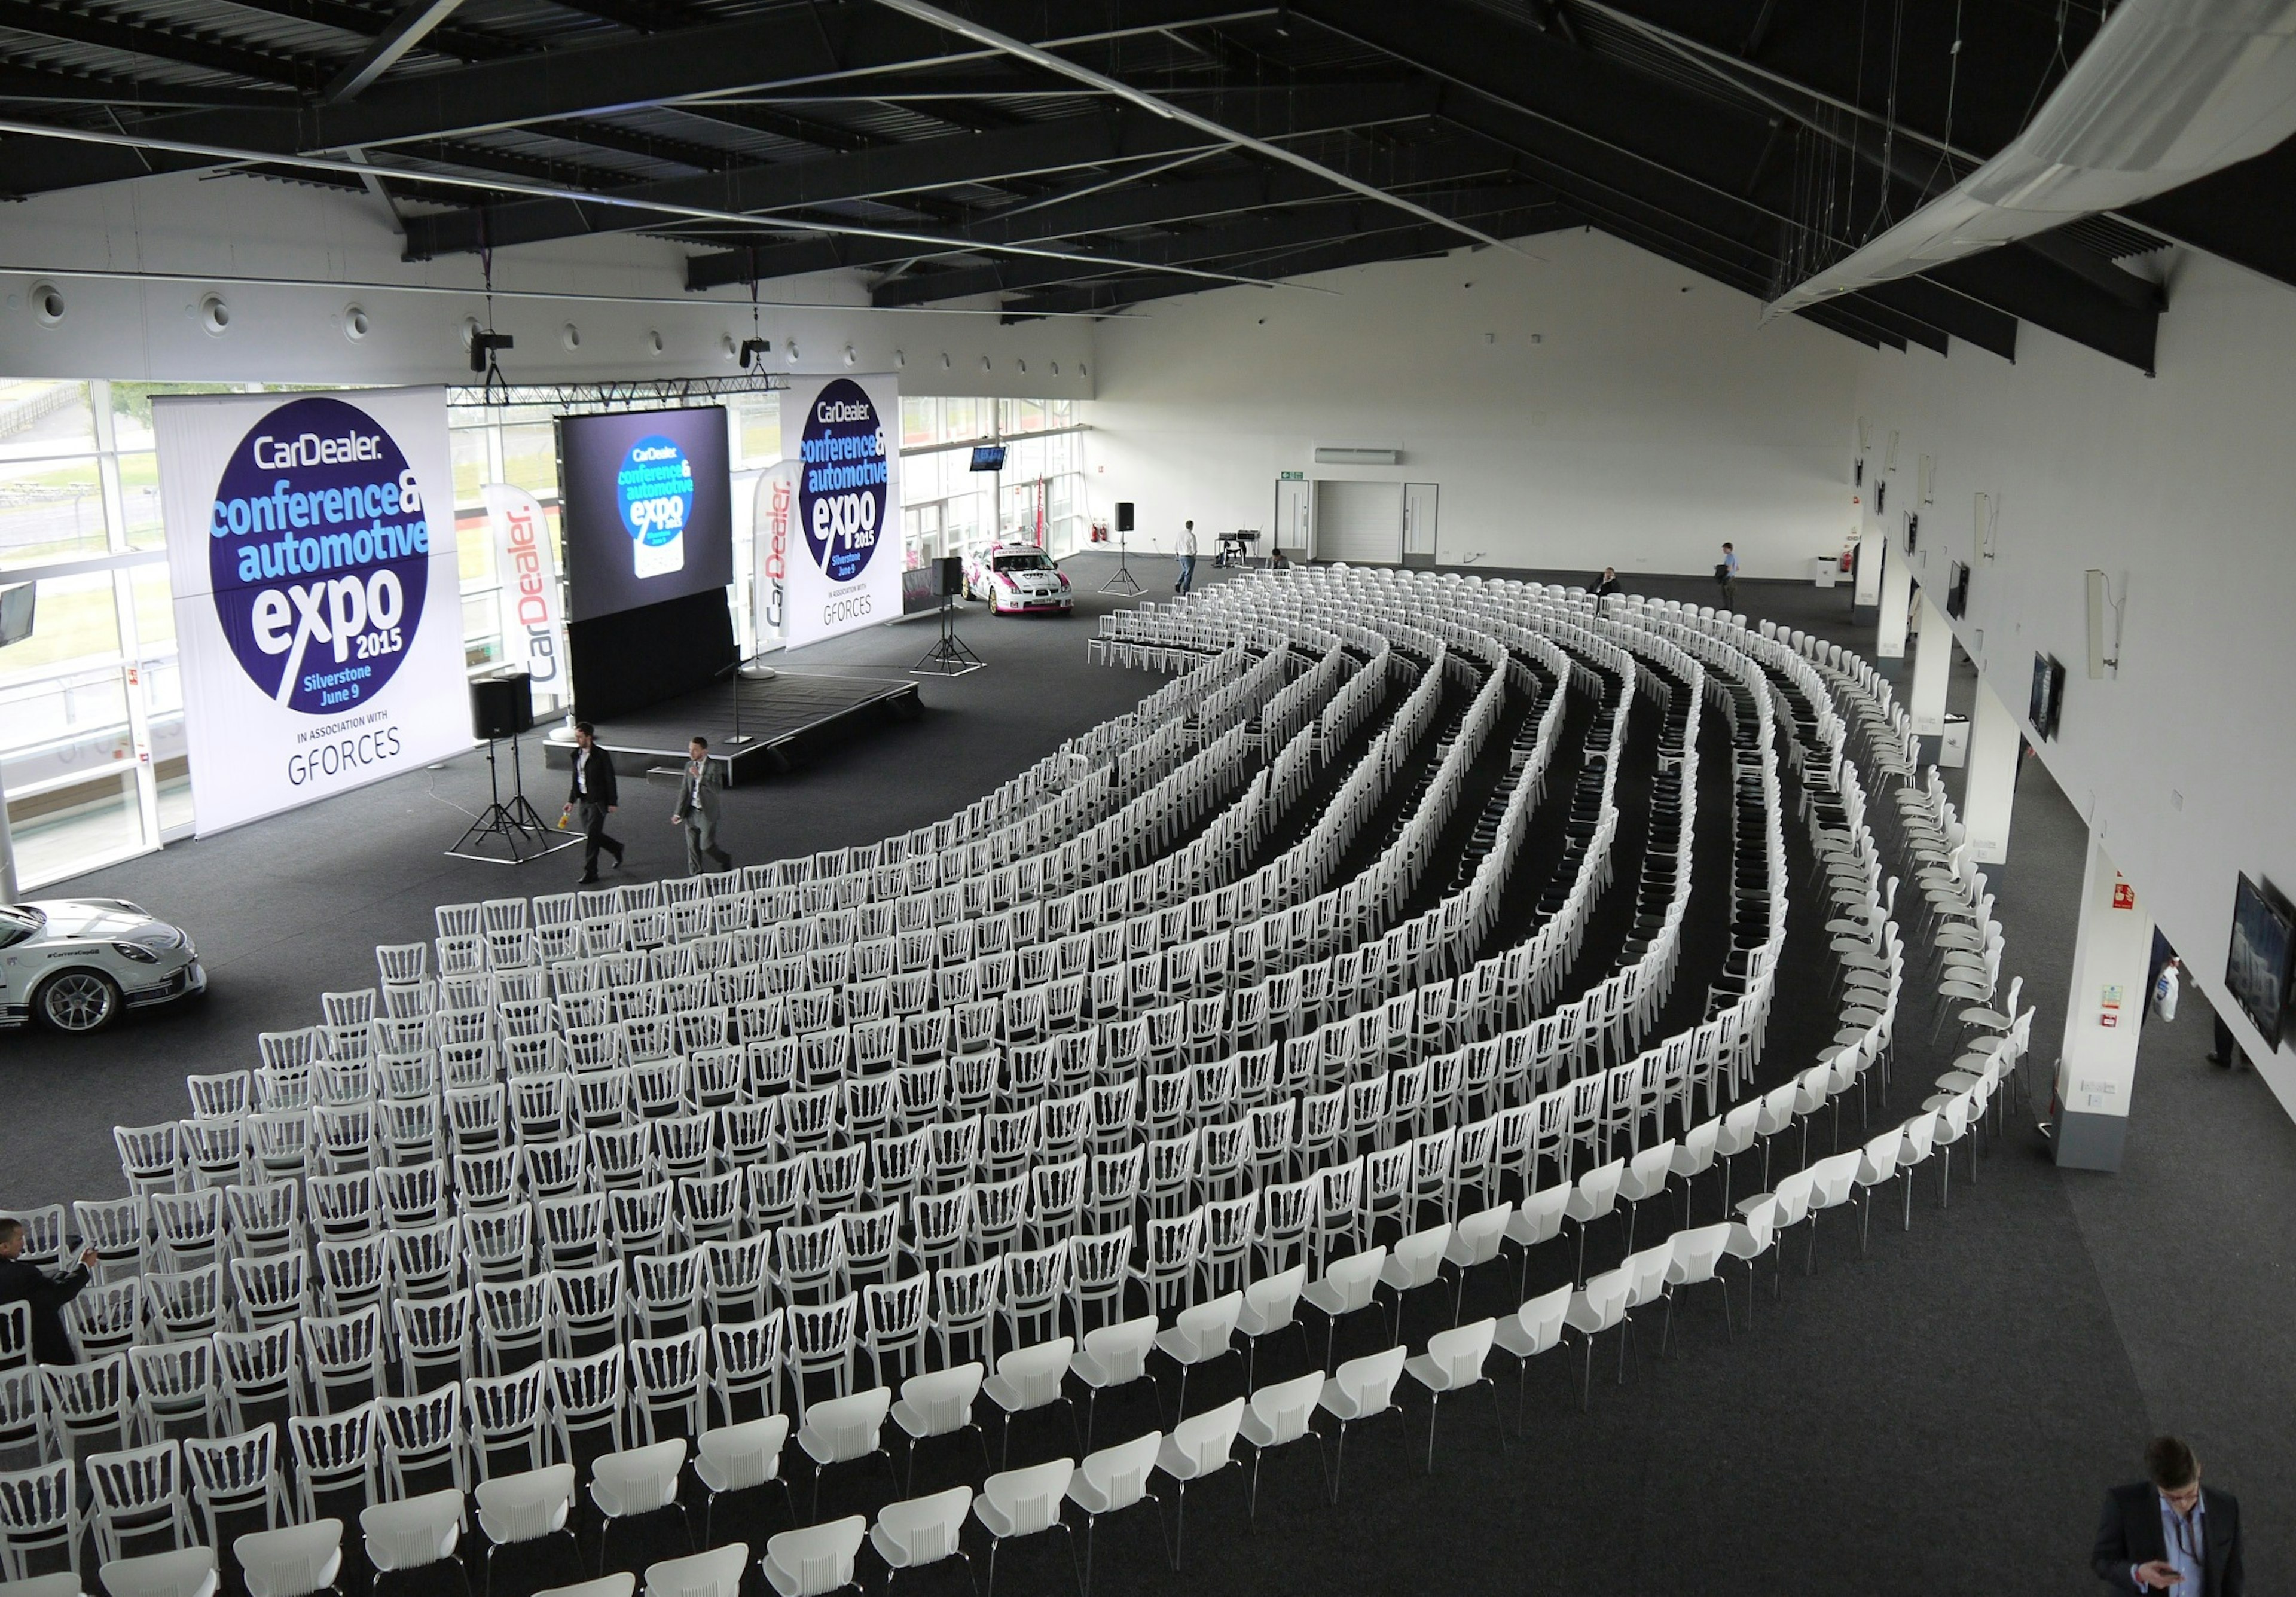 Business - Silverstone International Conference & Exhibition Centre